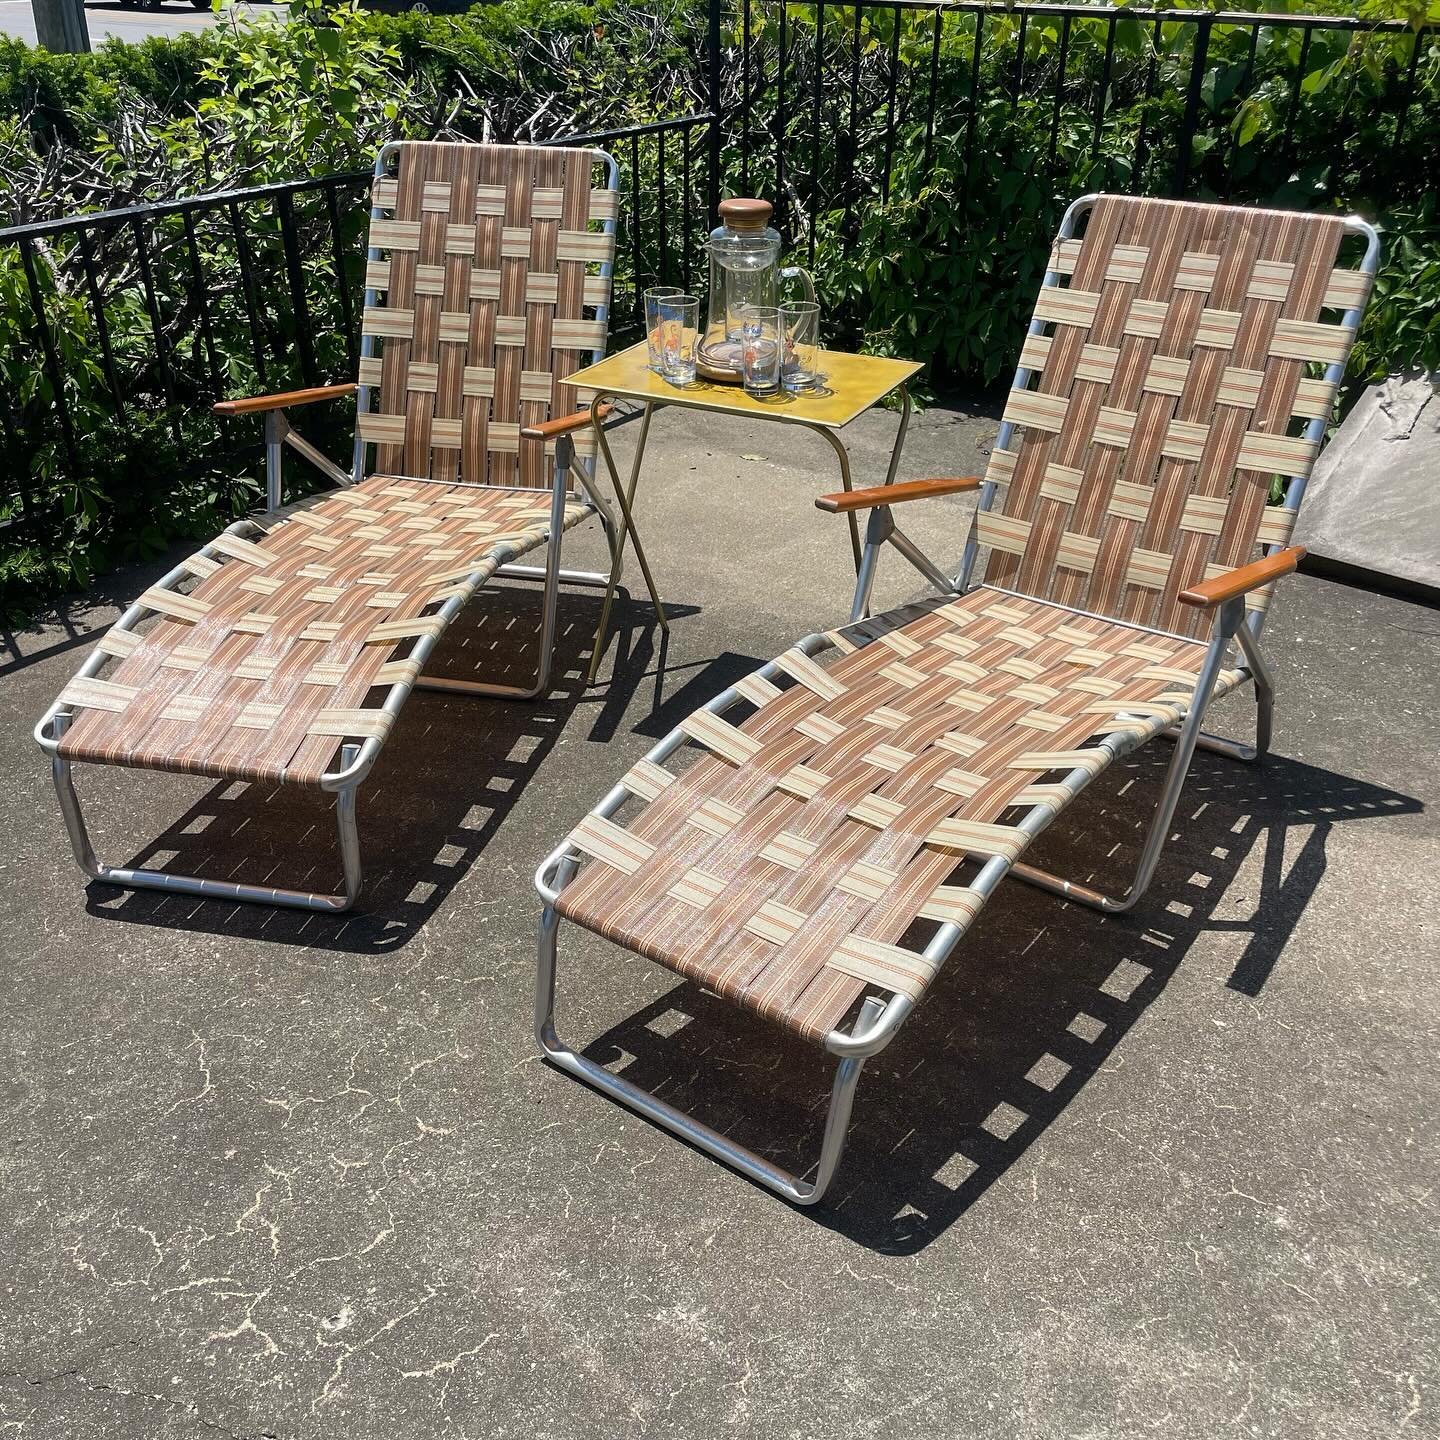 What summertime backyard dreams are made of. Stylish and comfy lounge chairs $75 each. 1960s Libbey Hialeah 🦩 glasses $40. Teak and glass bevy cooler and pitcher $44.50